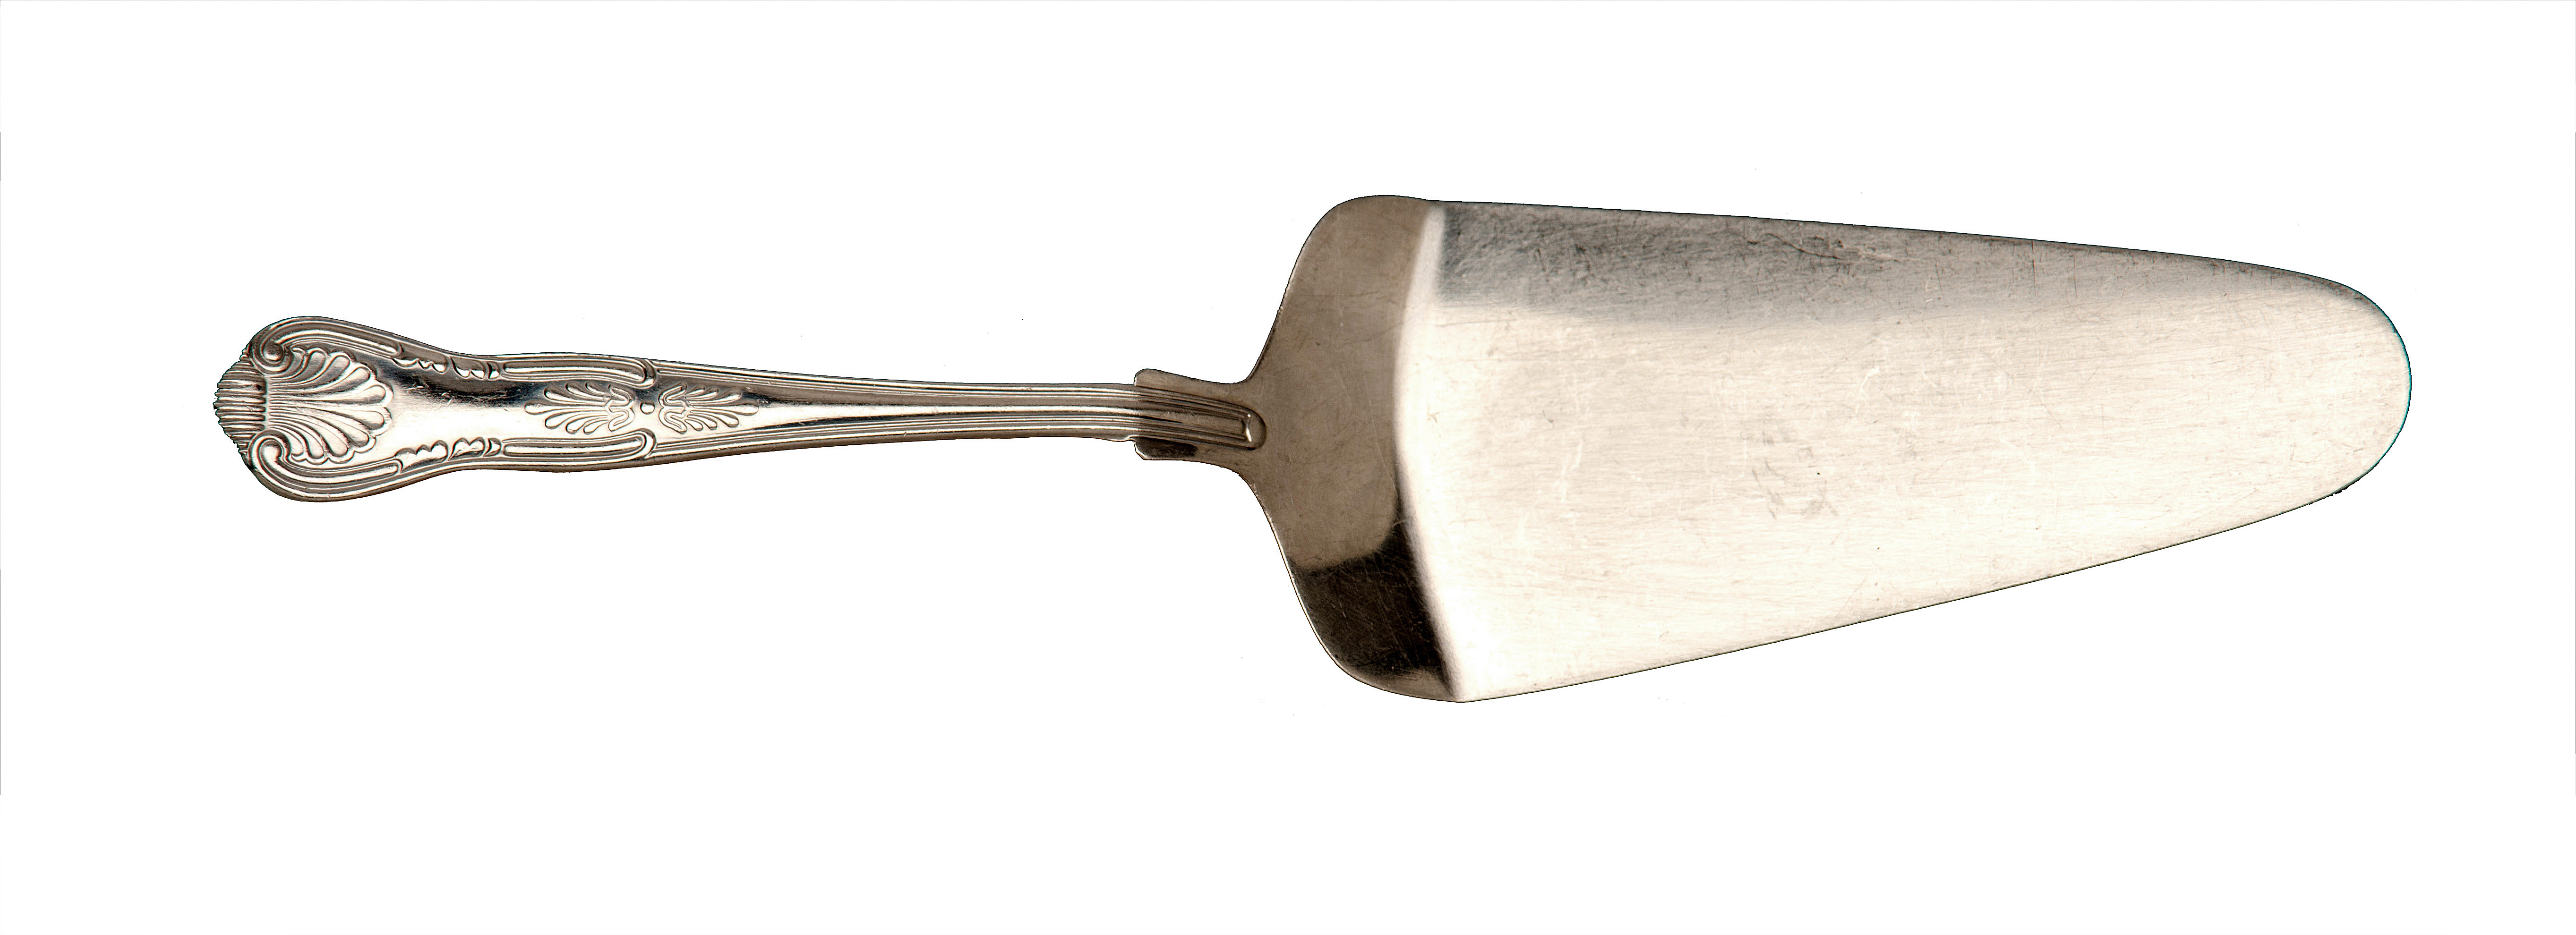 category_D1315 - Cake Slice - Stainless Steel